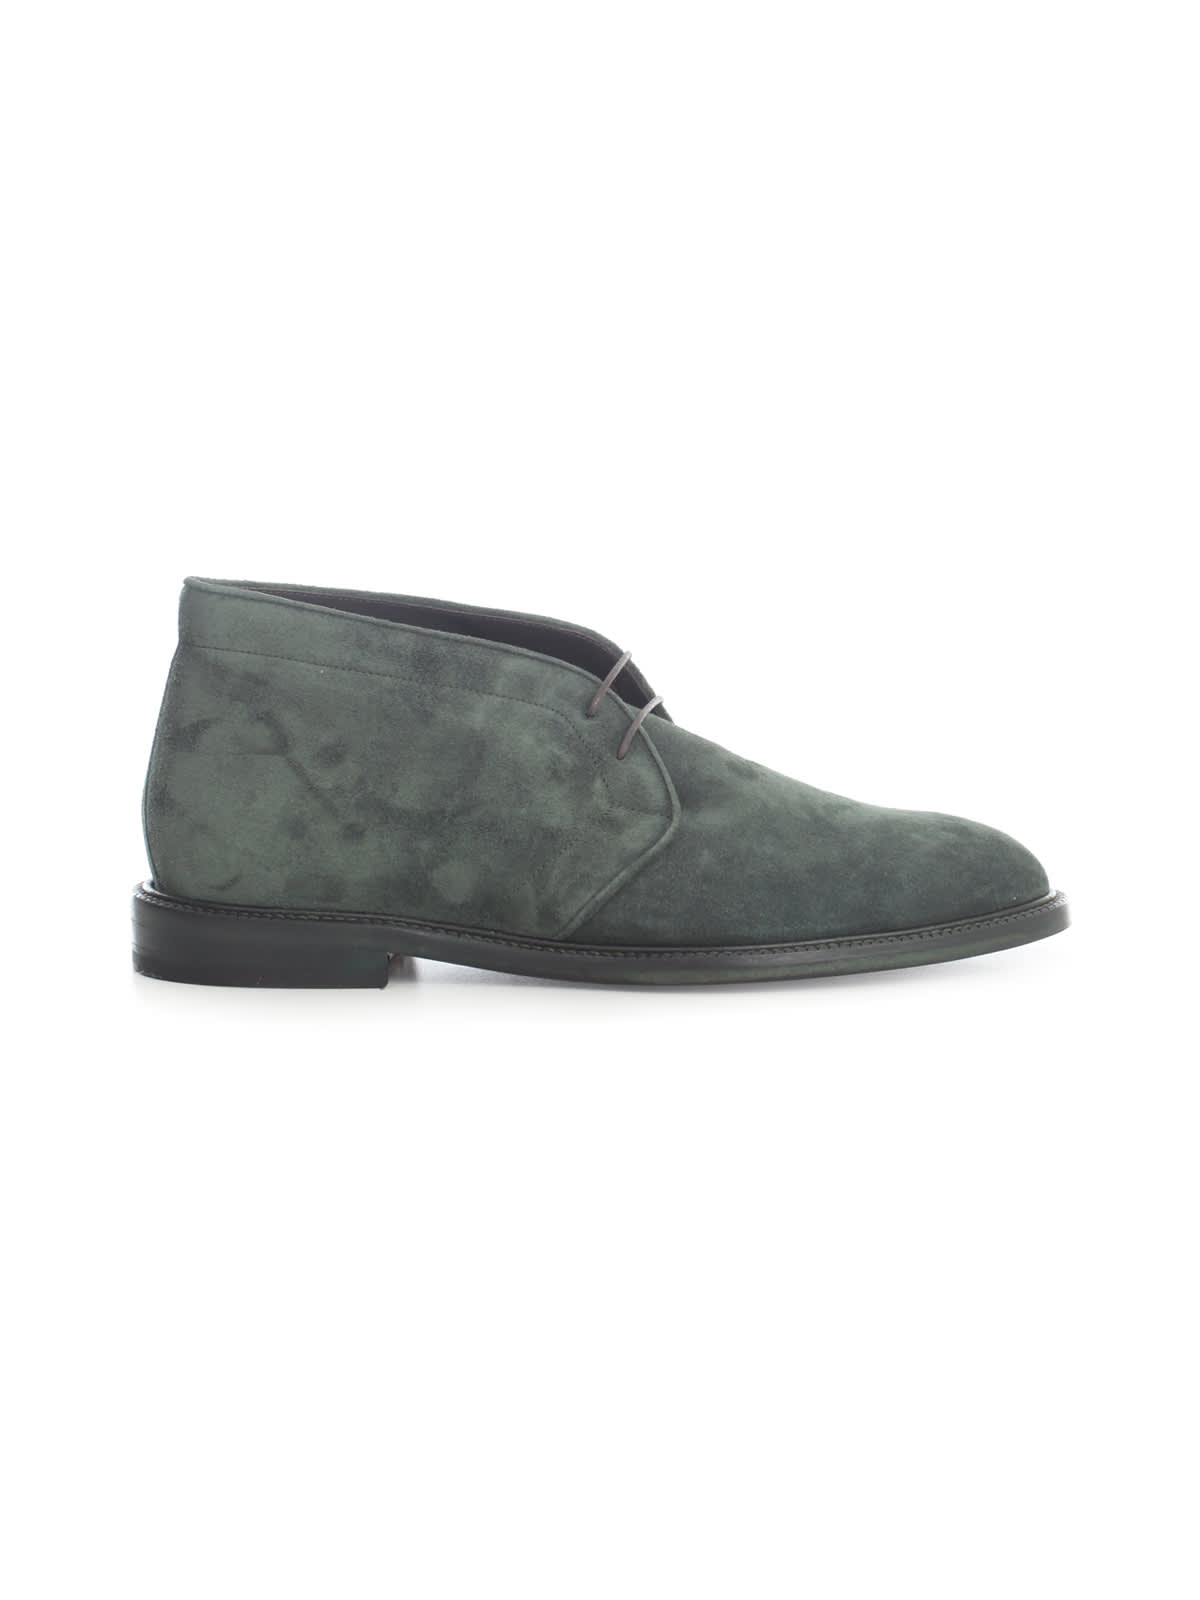 Paul Smith Mens Shoe Mendes Military Green